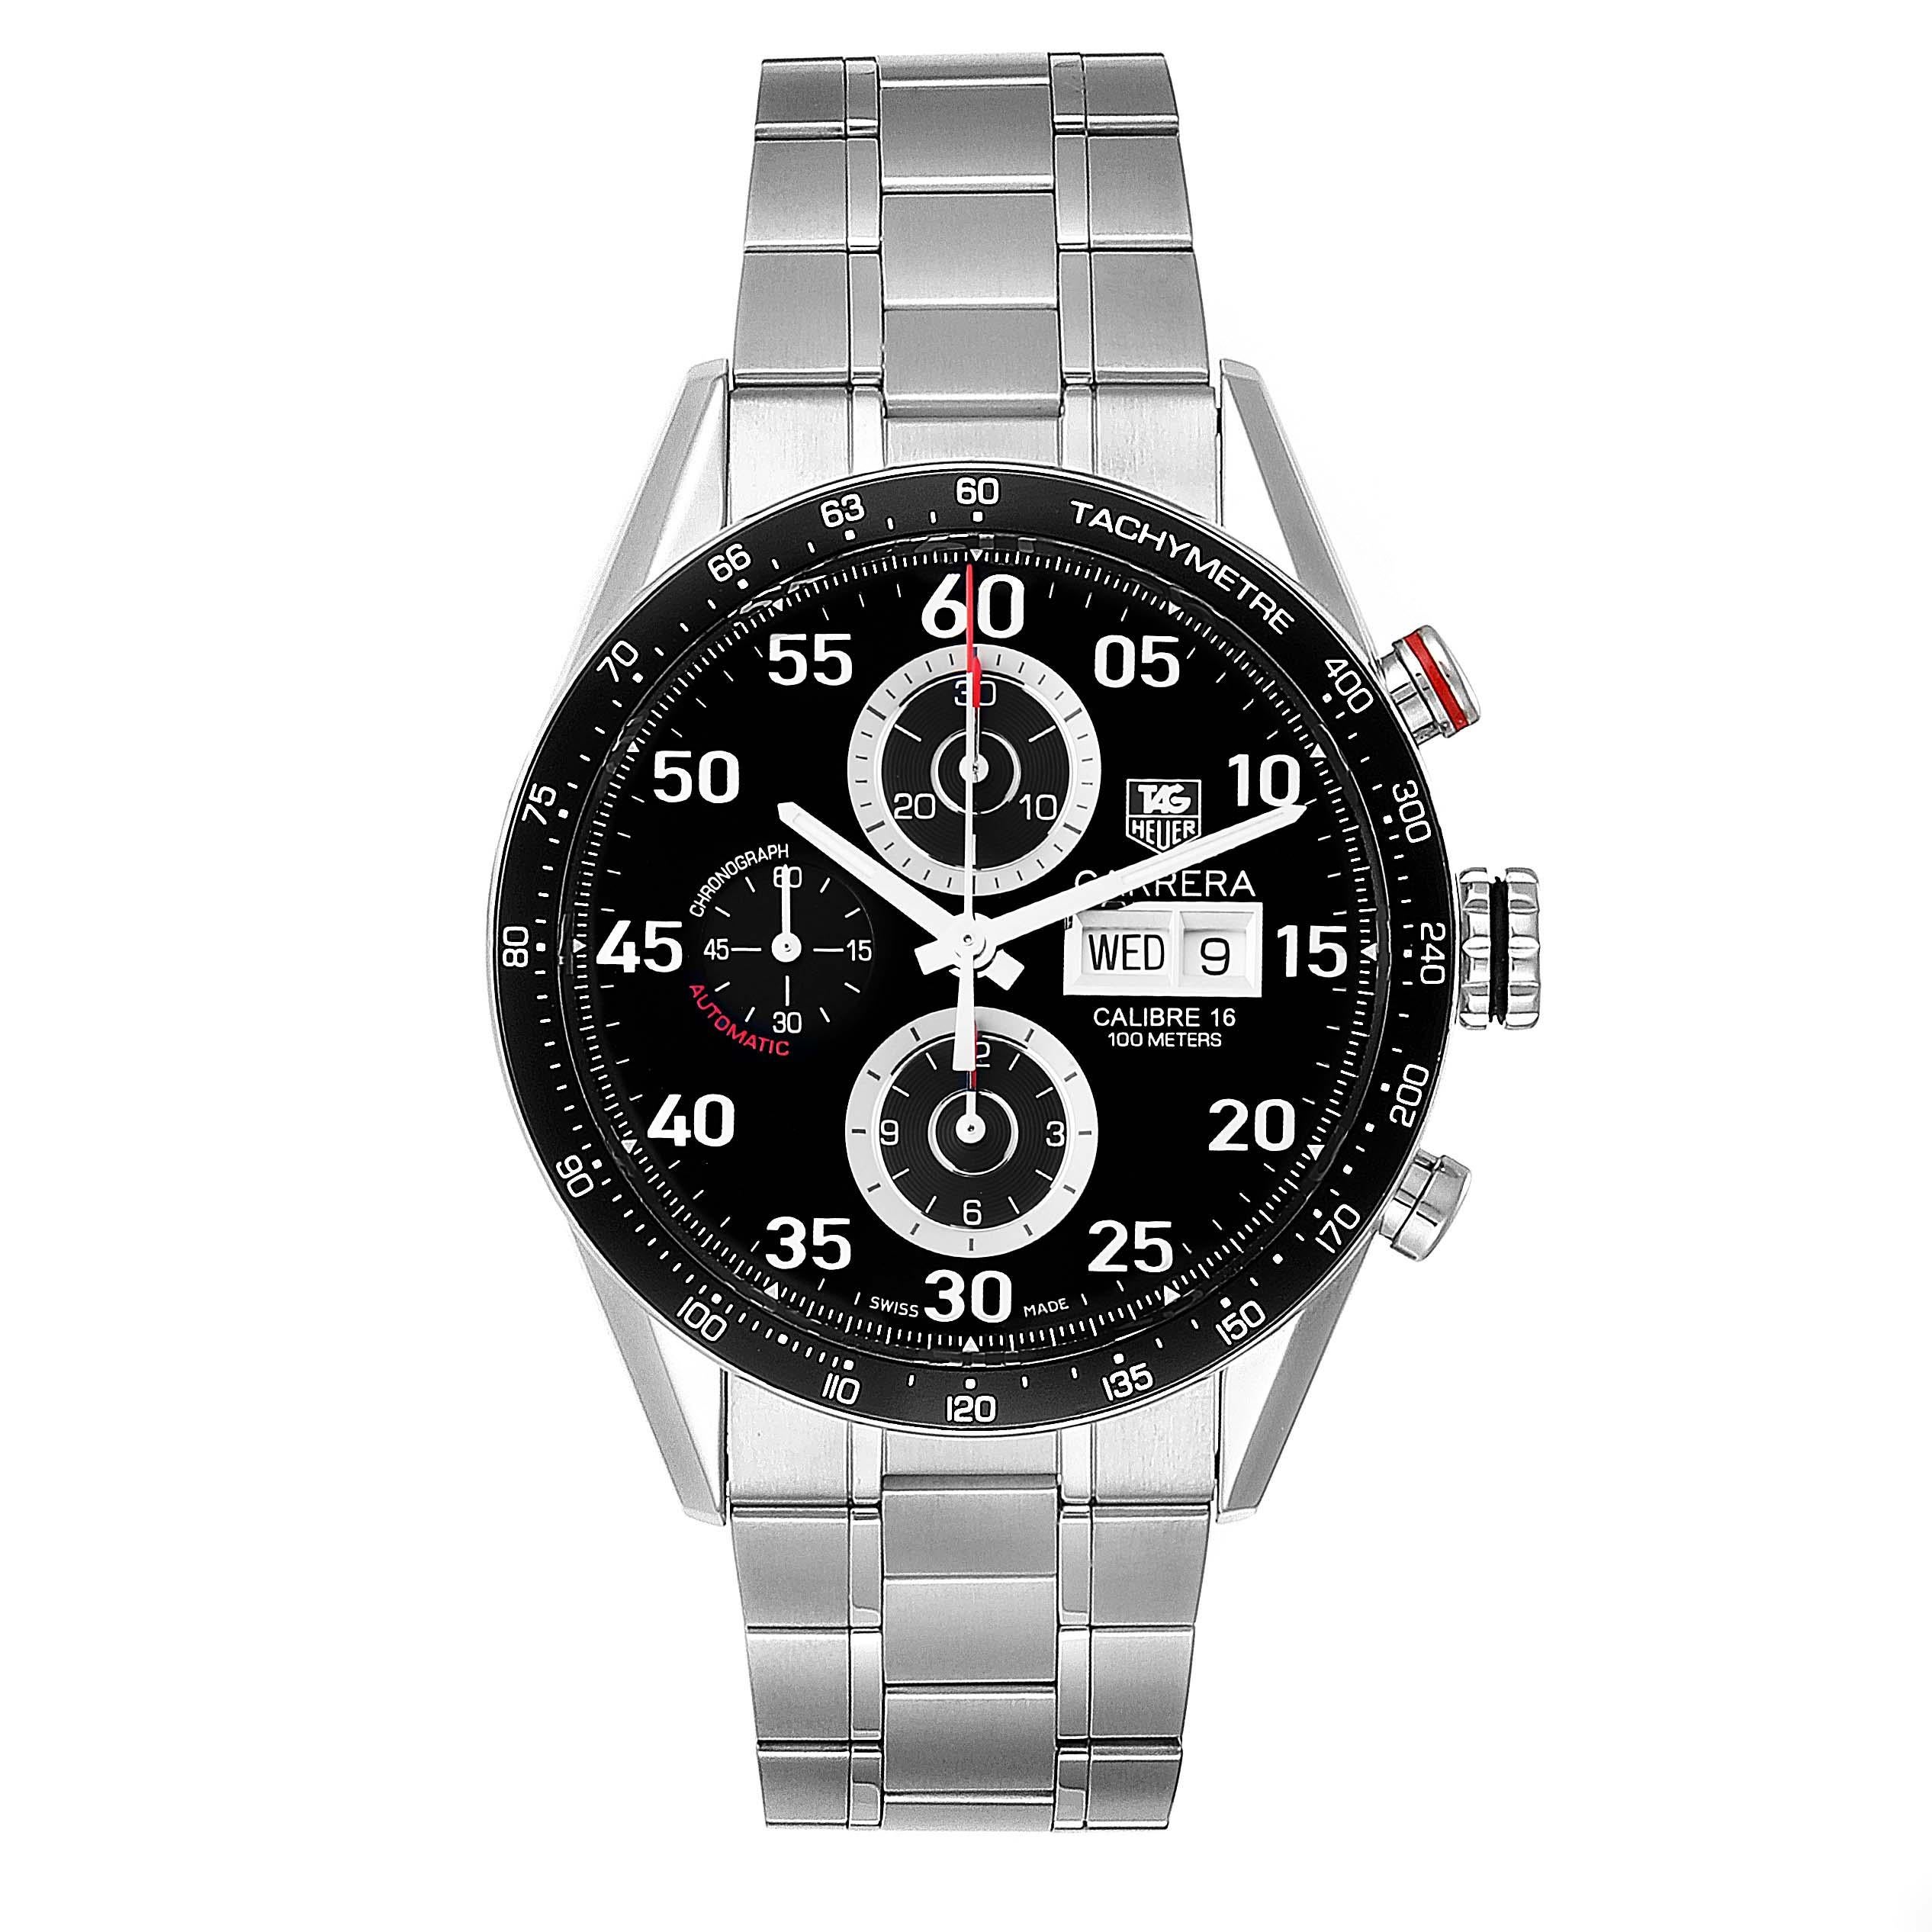 Tag Heuer Carrera Day Date Chronograph Steel Mens Watch CV2A10 Box Card. Automatic self-winding chronograph movement. Stainless steel case 43.0 mm. Case thickness: 12 mm. Black bezel with tachymeter scale. All the photos are of the actual watch for